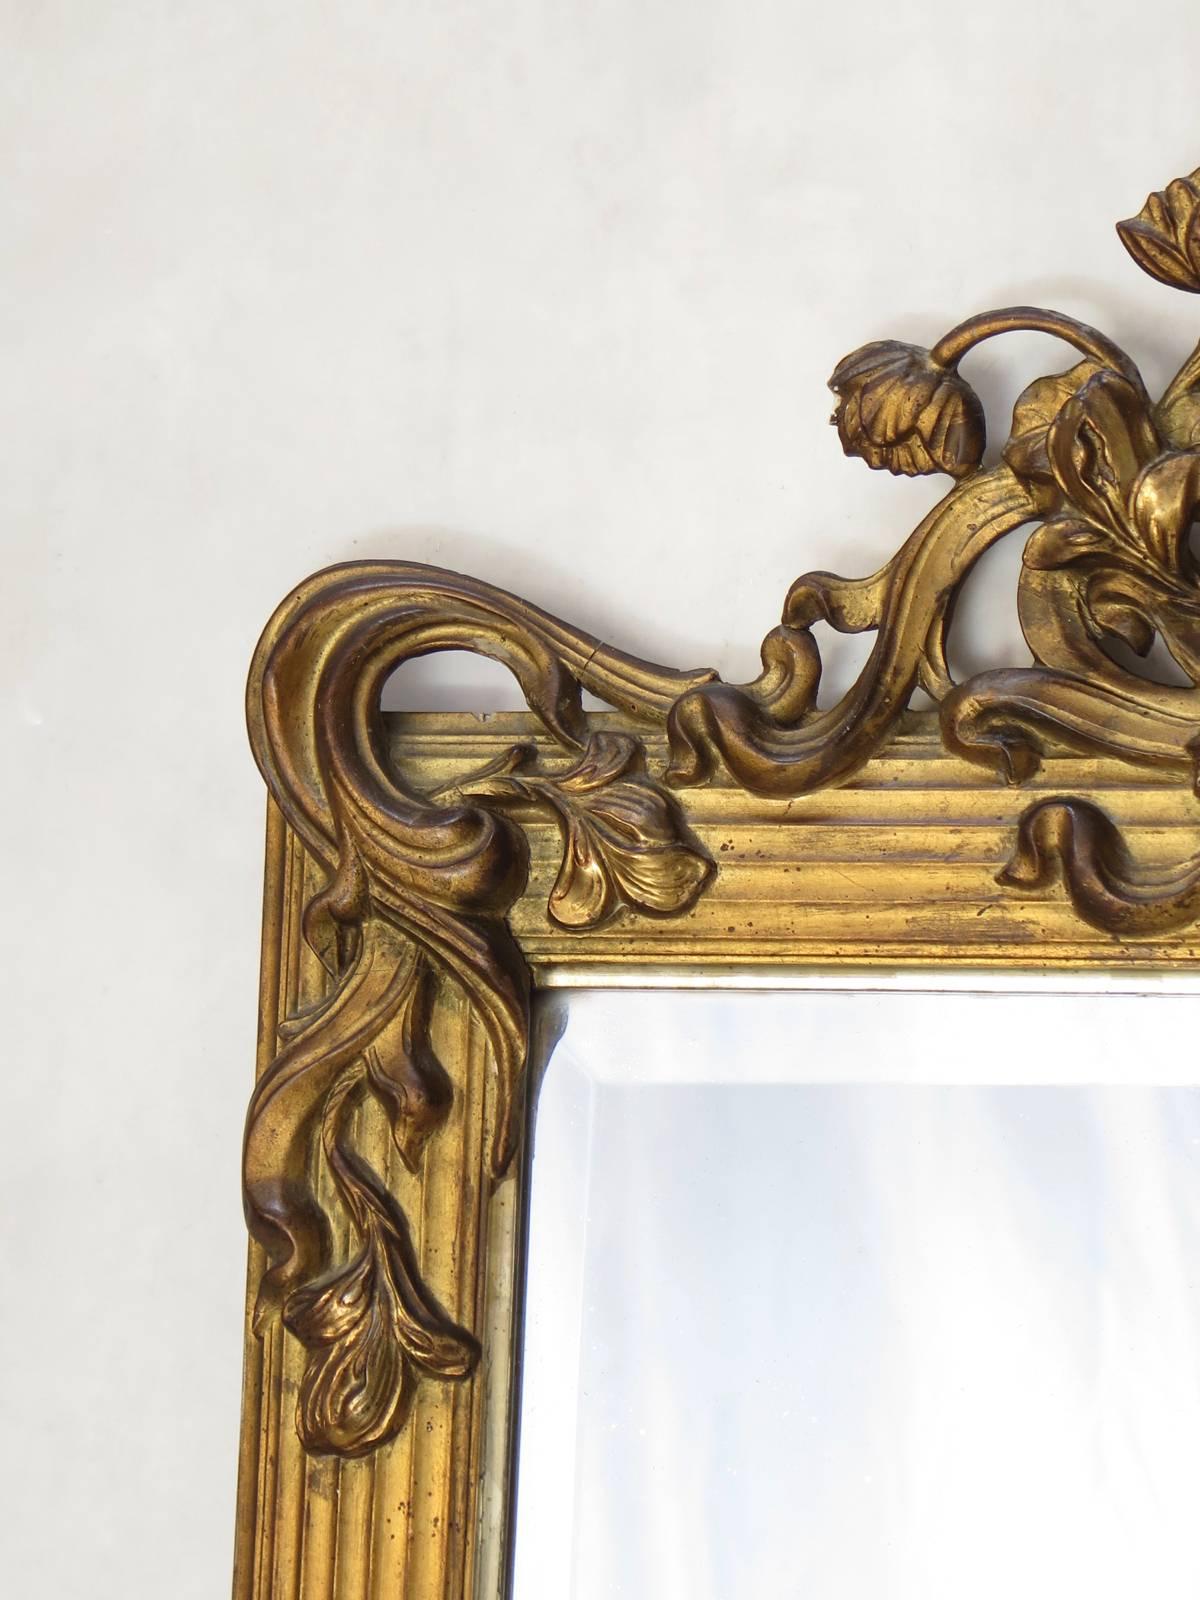 French Large Art Nouveau Mirror with Lotus Flower Decor, France, Early 1900s For Sale